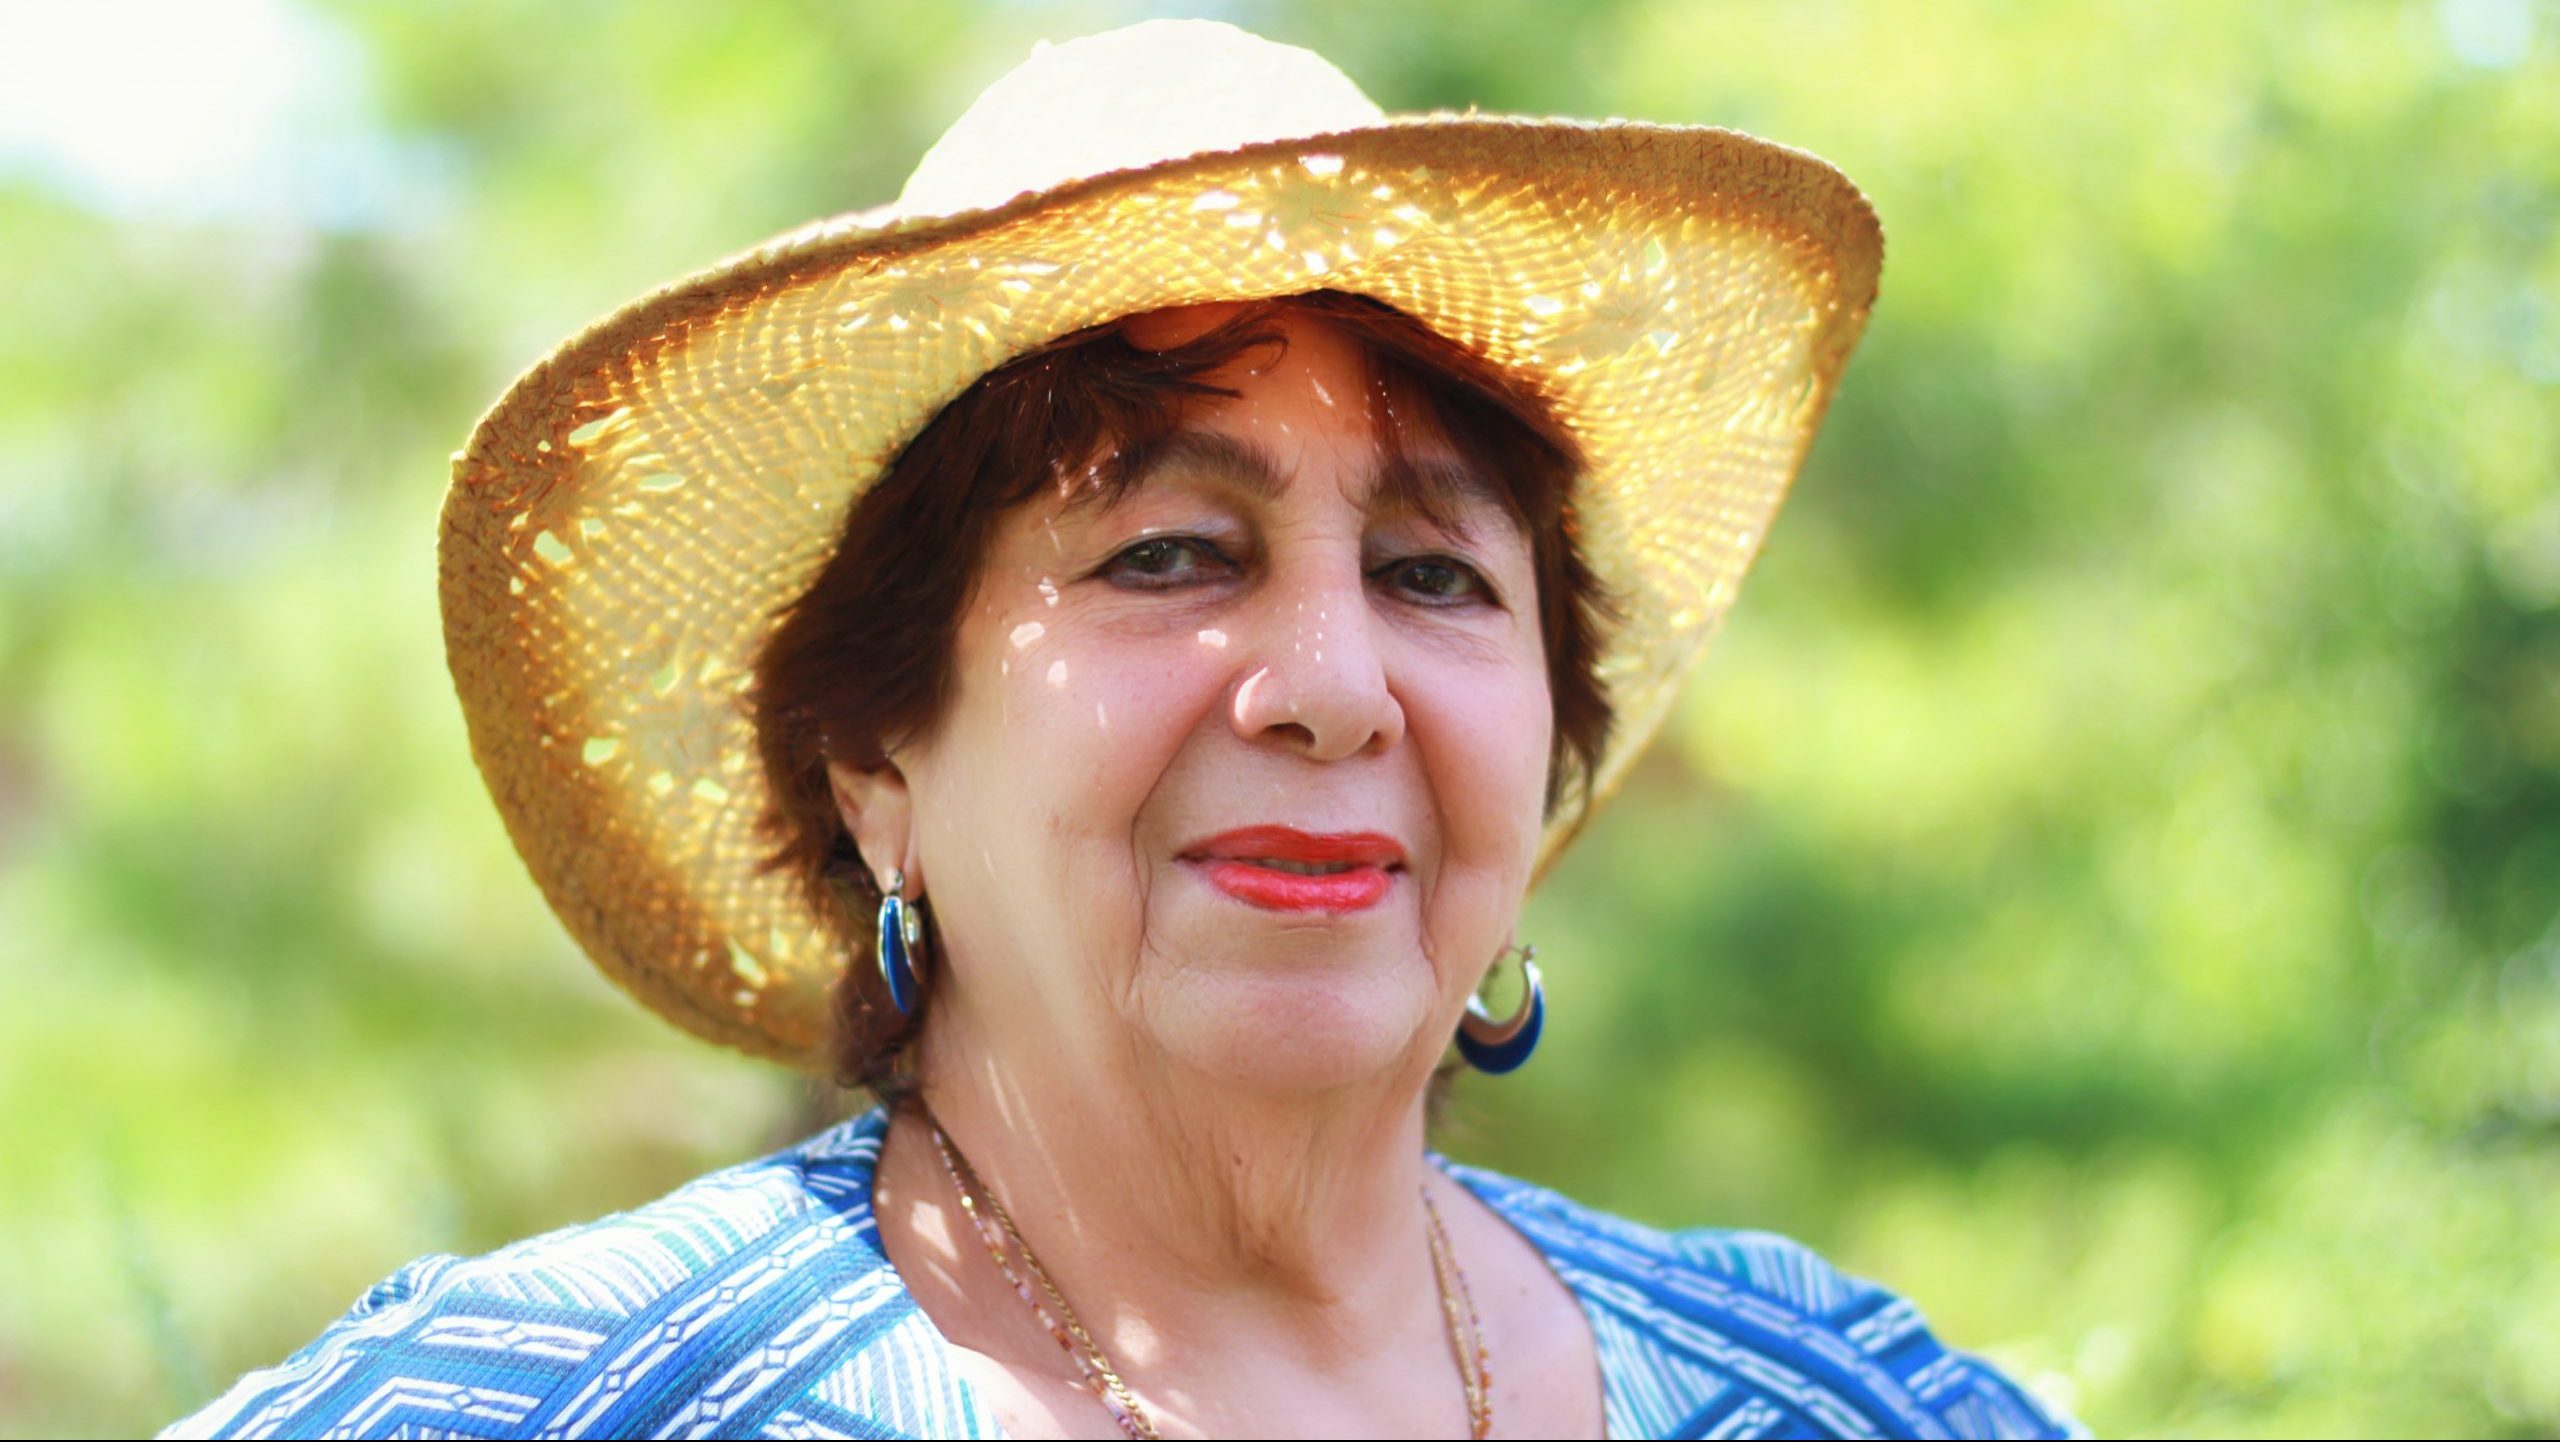 A proud older woman standing outside on a sunny day, wearing a sun hat. Green trees behind her.